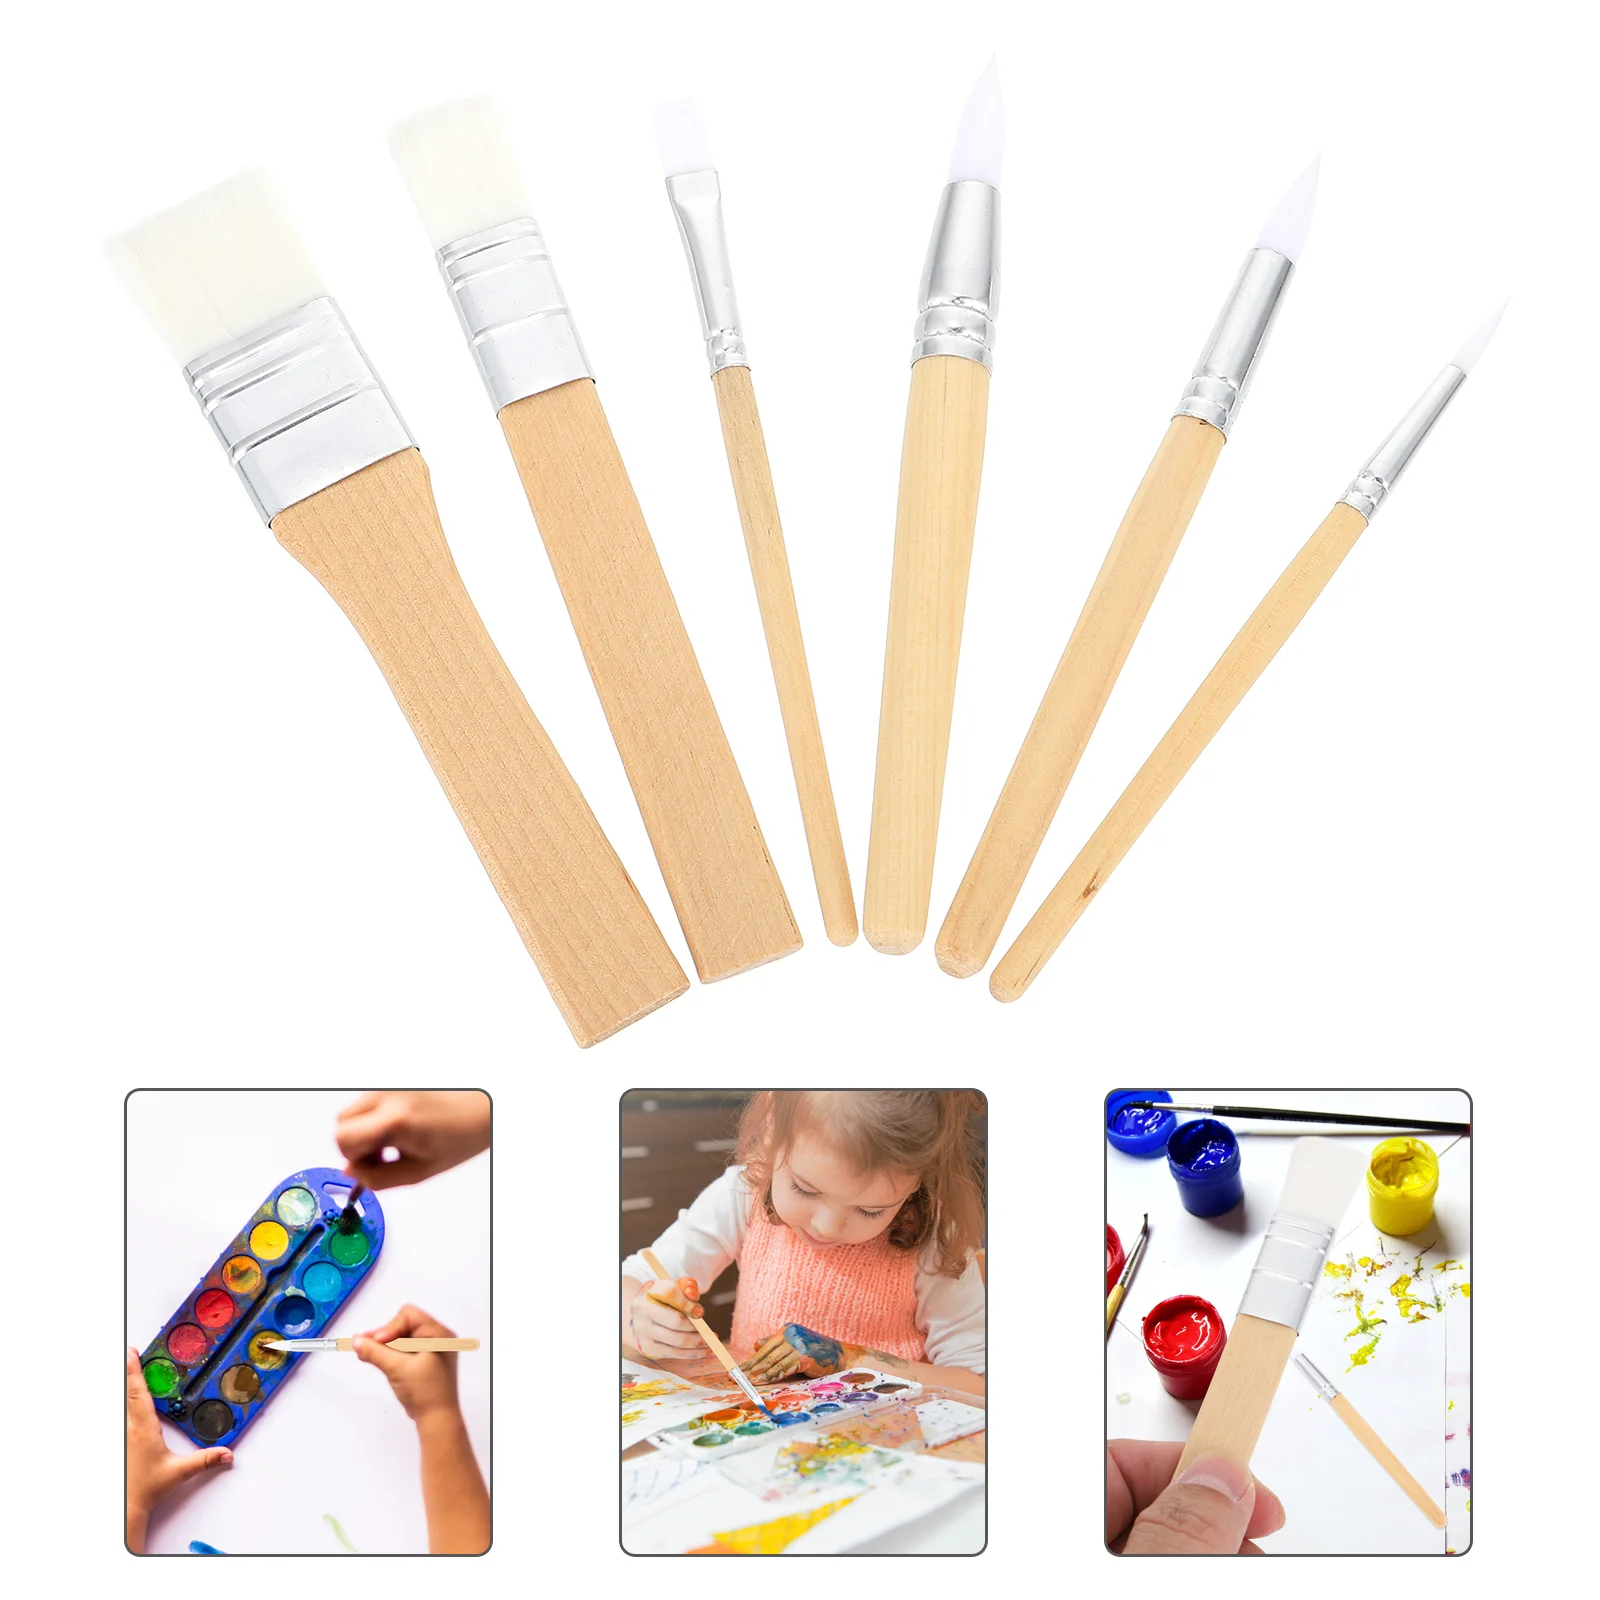 6pcs Water Brushes Set Round Pointed Tip Nylon Hair Artist Pen Drawing Tool Supplies for Watercolors Inks Oil Gouache Tempera